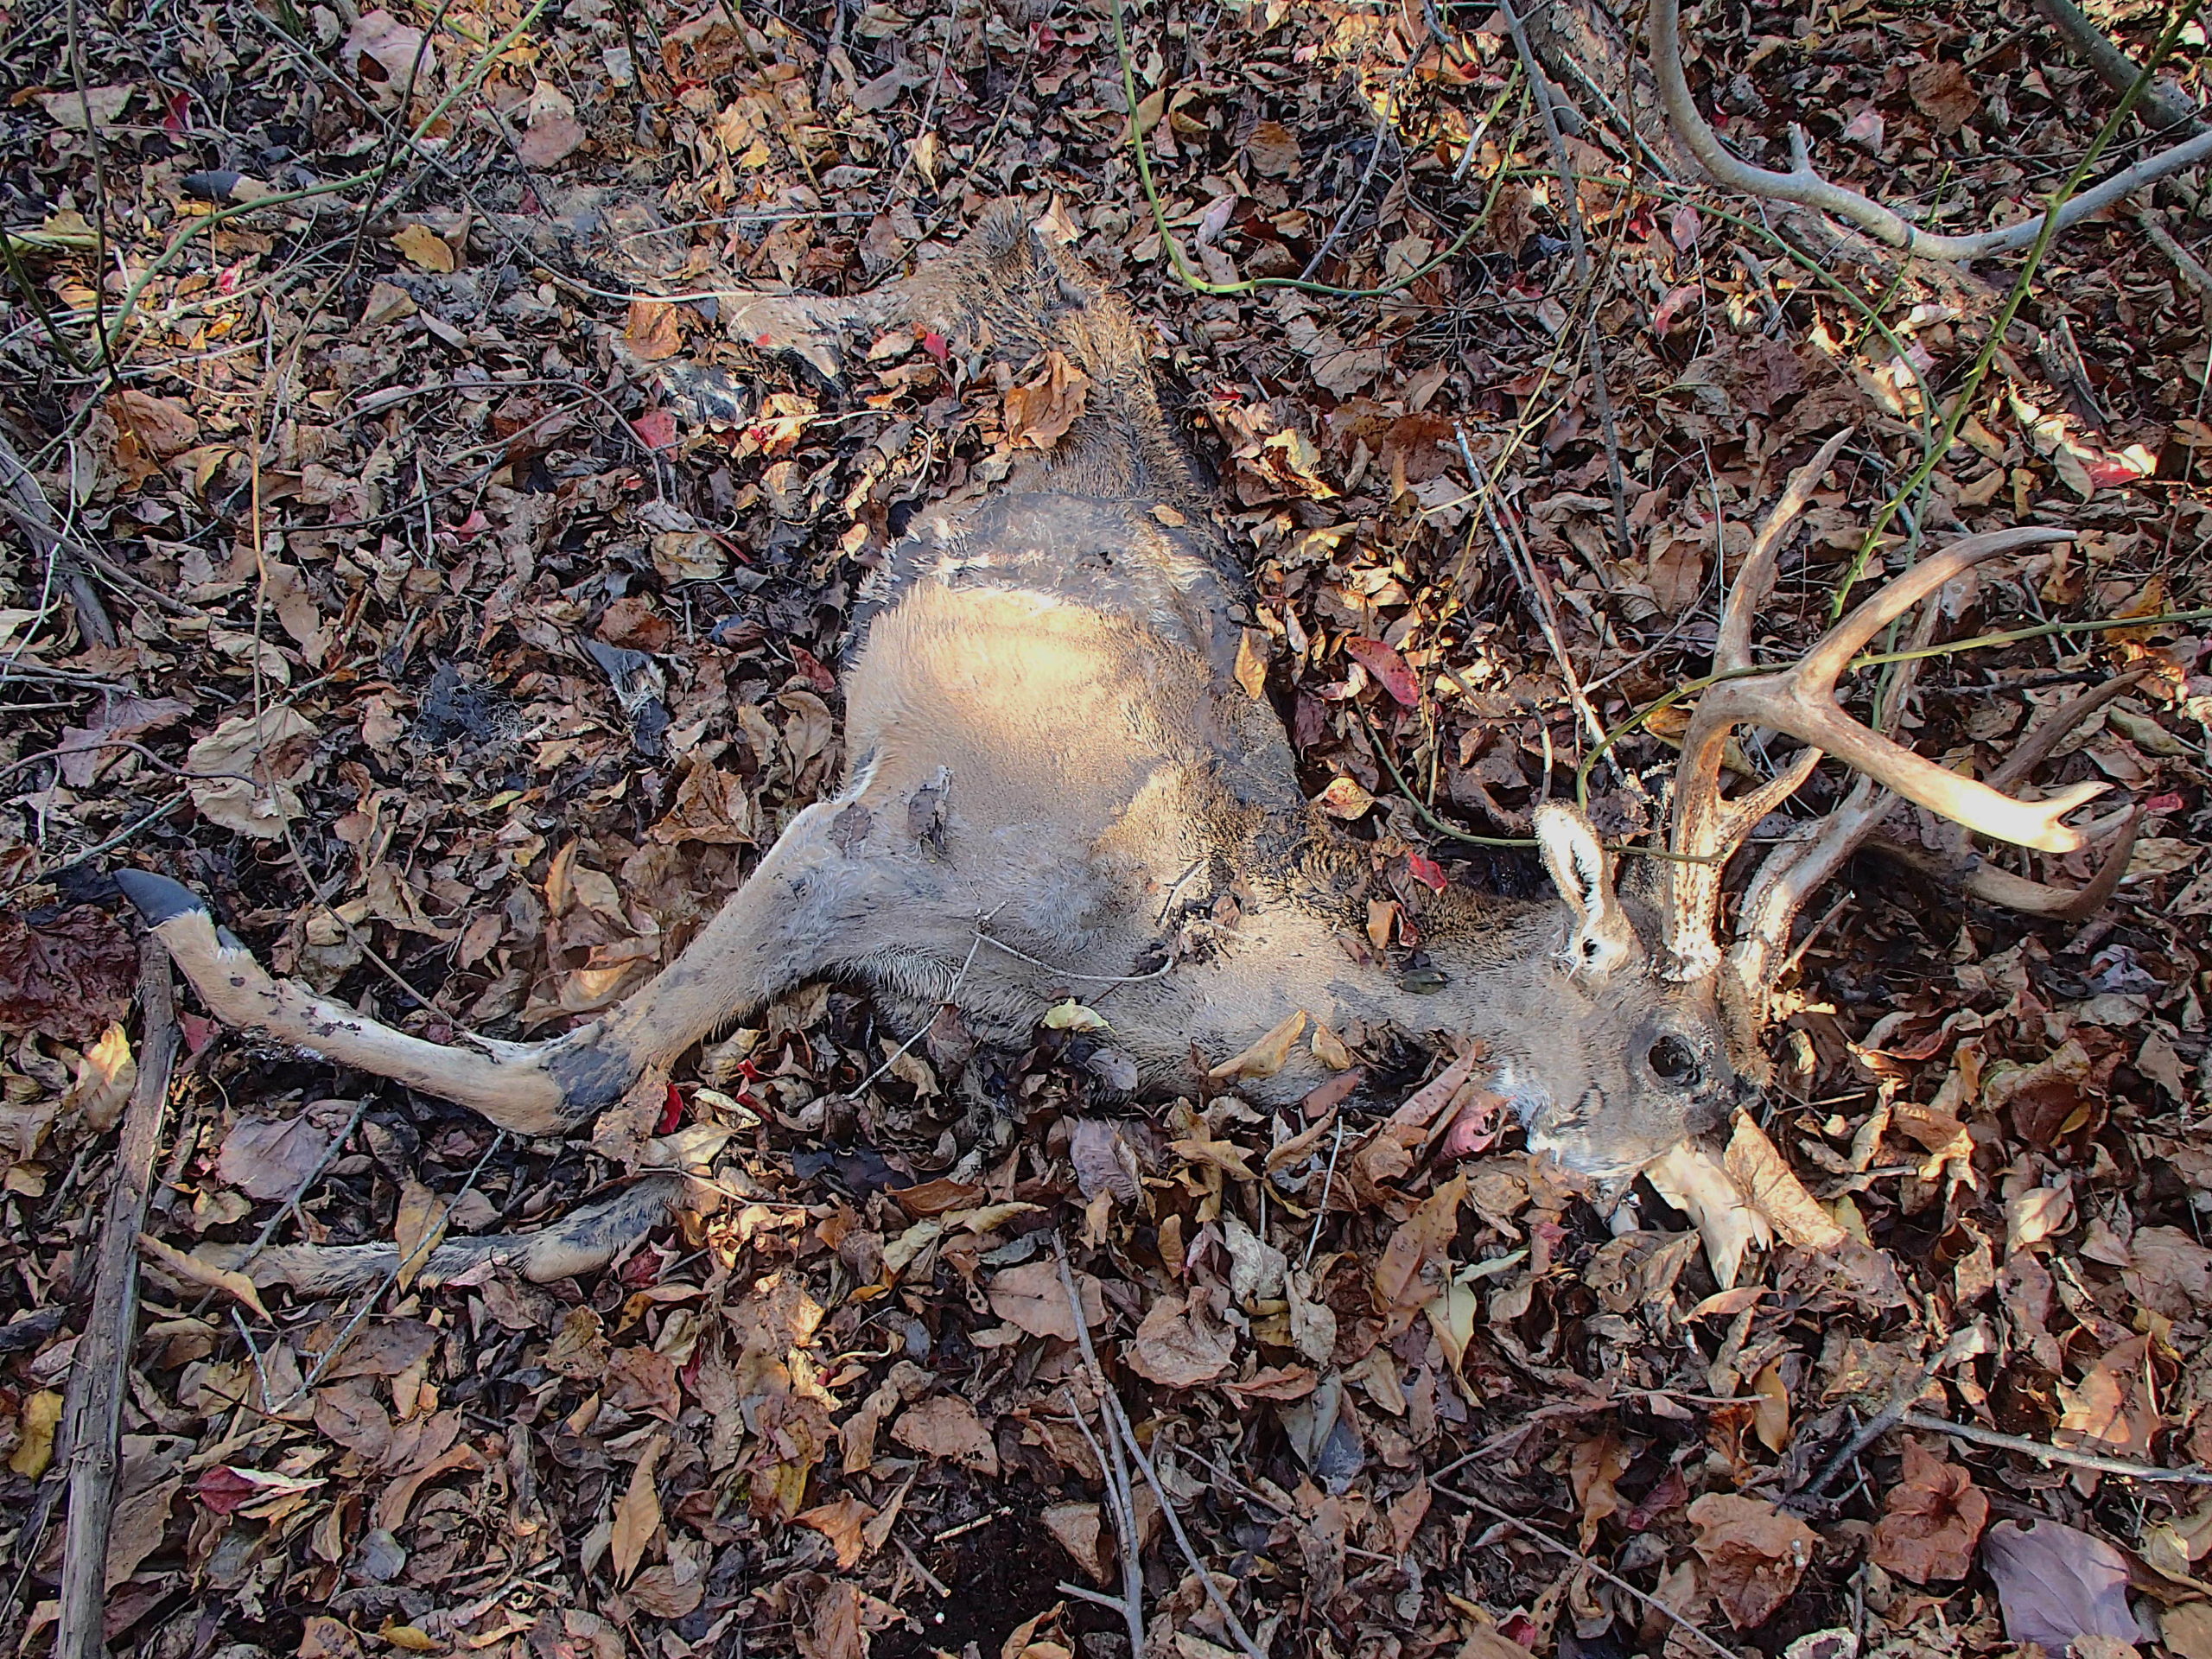 This buck was killed in Southold by epizootic hemorrhagic disease, and apparently not scavenged by any birds or mammals. MIKE BOTTINI